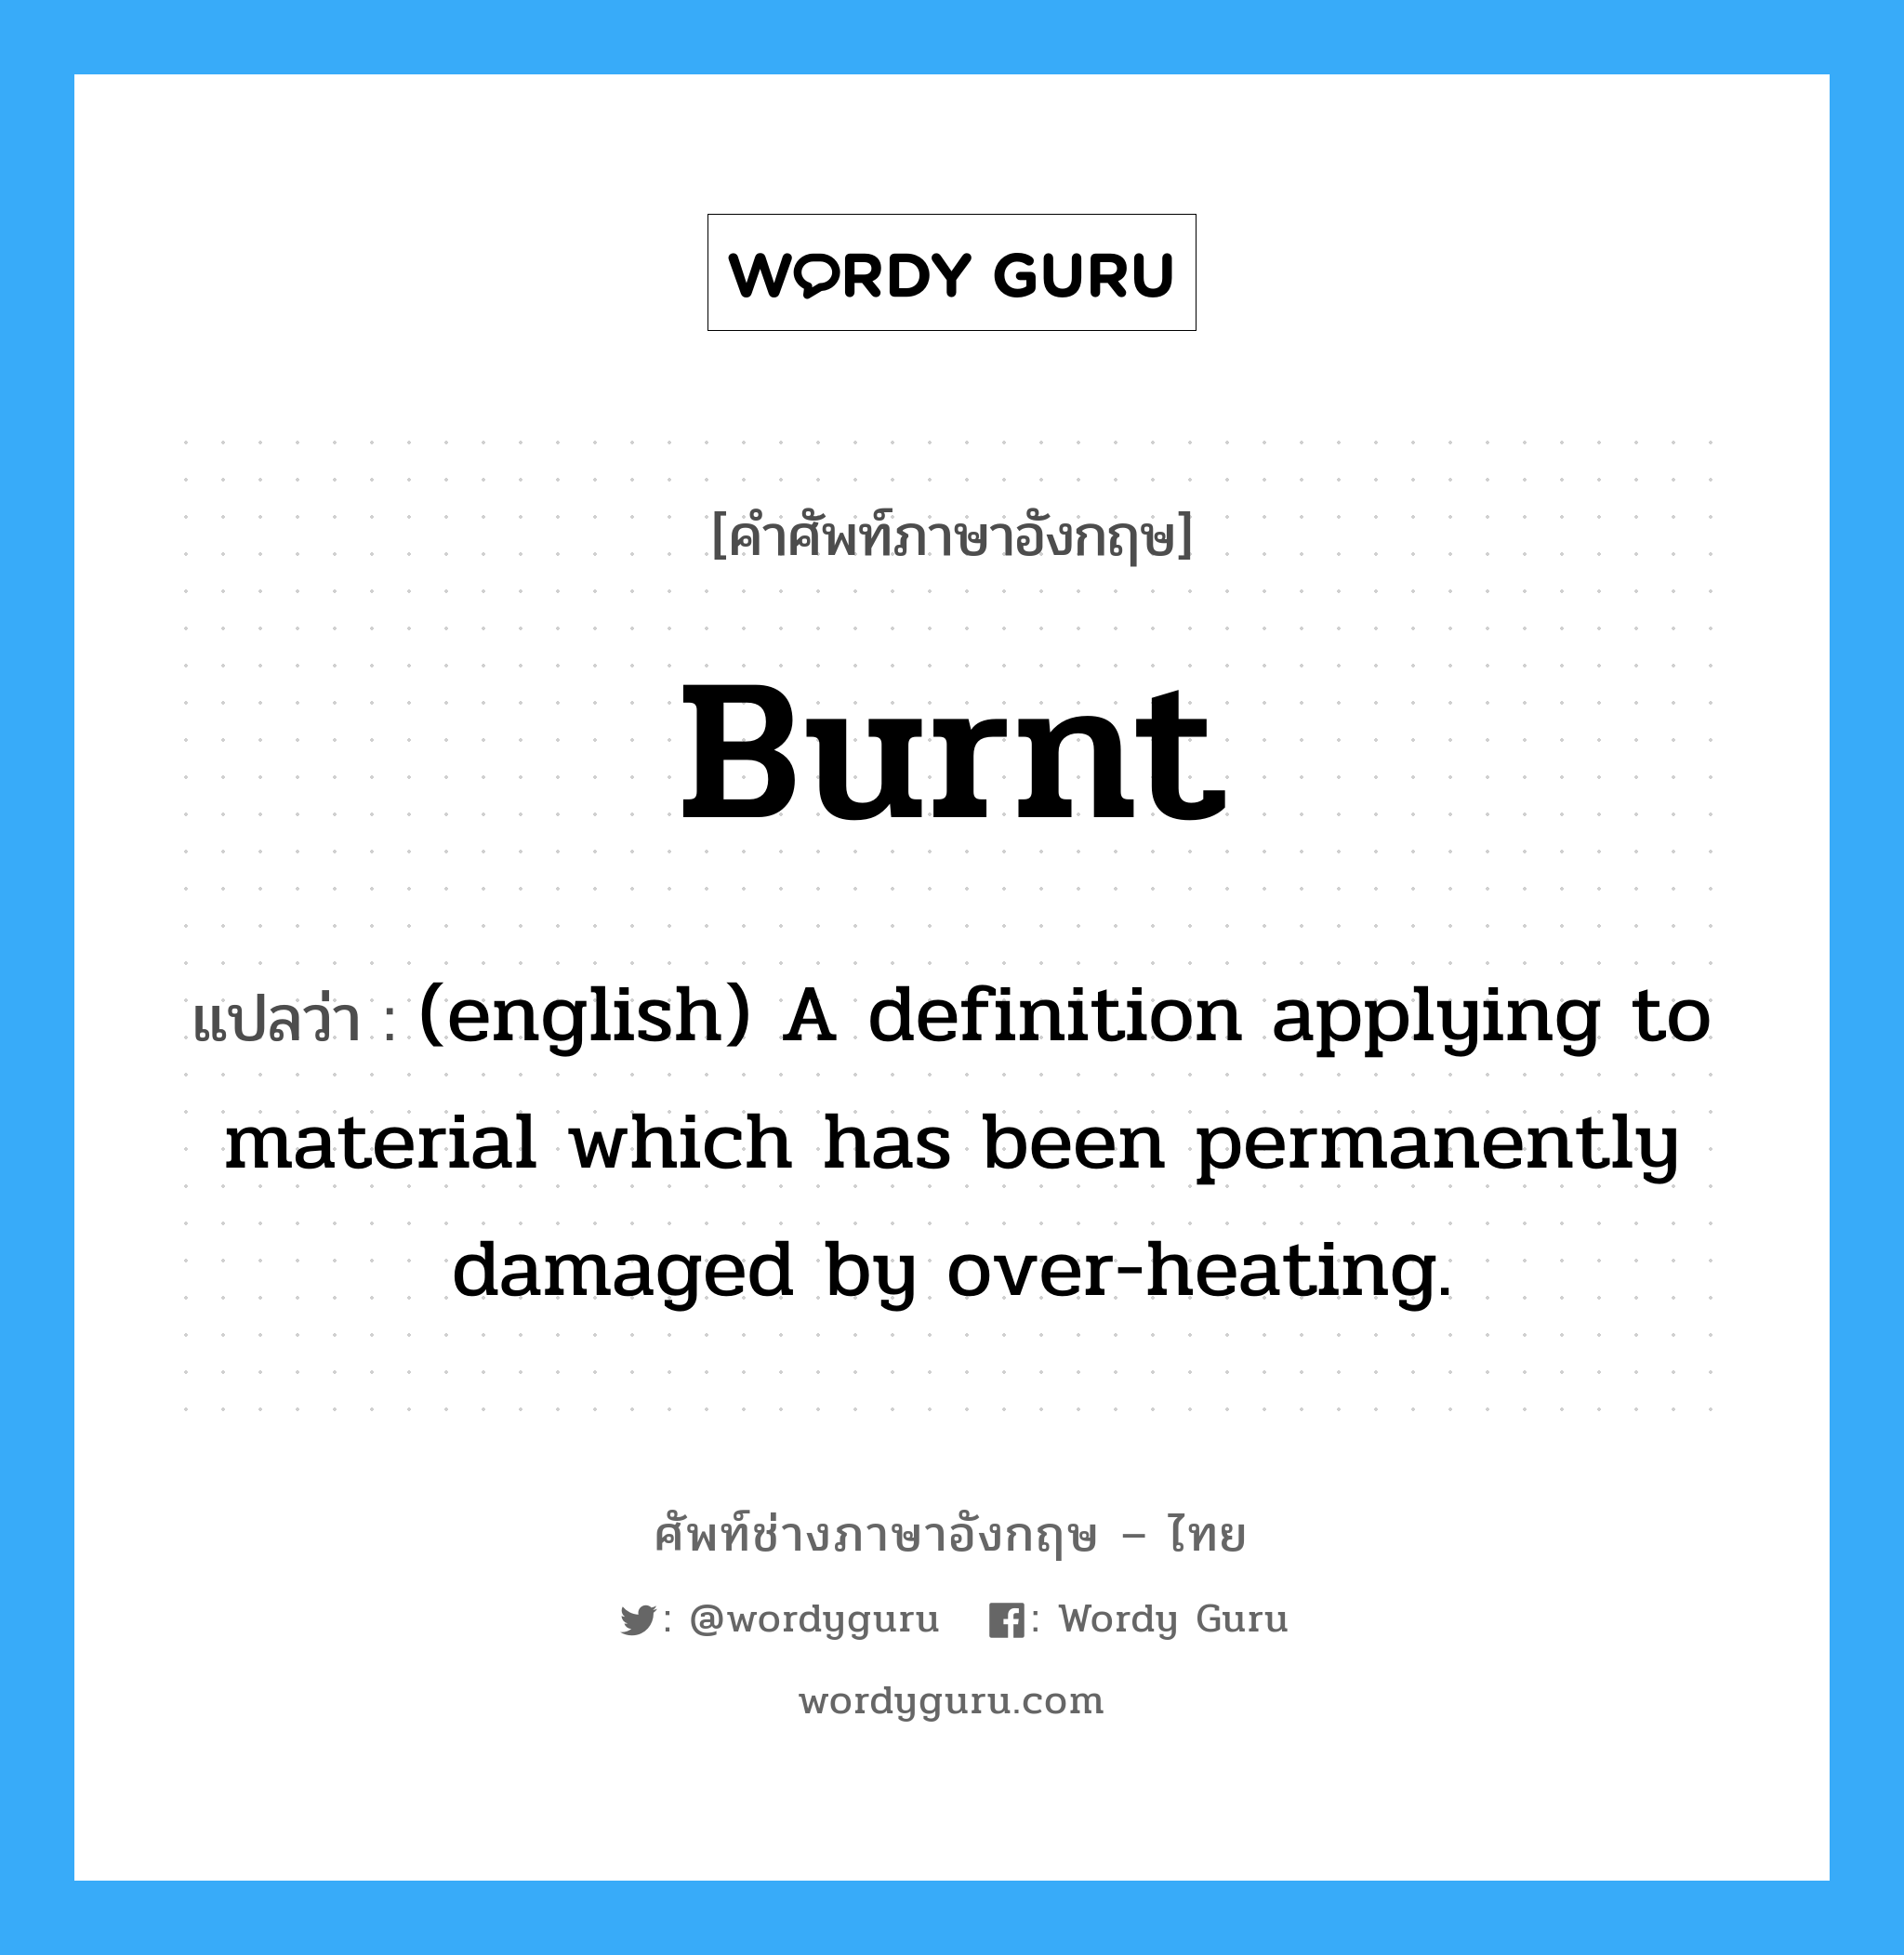 Burnt แปลว่า?, คำศัพท์ช่างภาษาอังกฤษ - ไทย Burnt คำศัพท์ภาษาอังกฤษ Burnt แปลว่า (english) A definition applying to material which has been permanently damaged by over-heating.